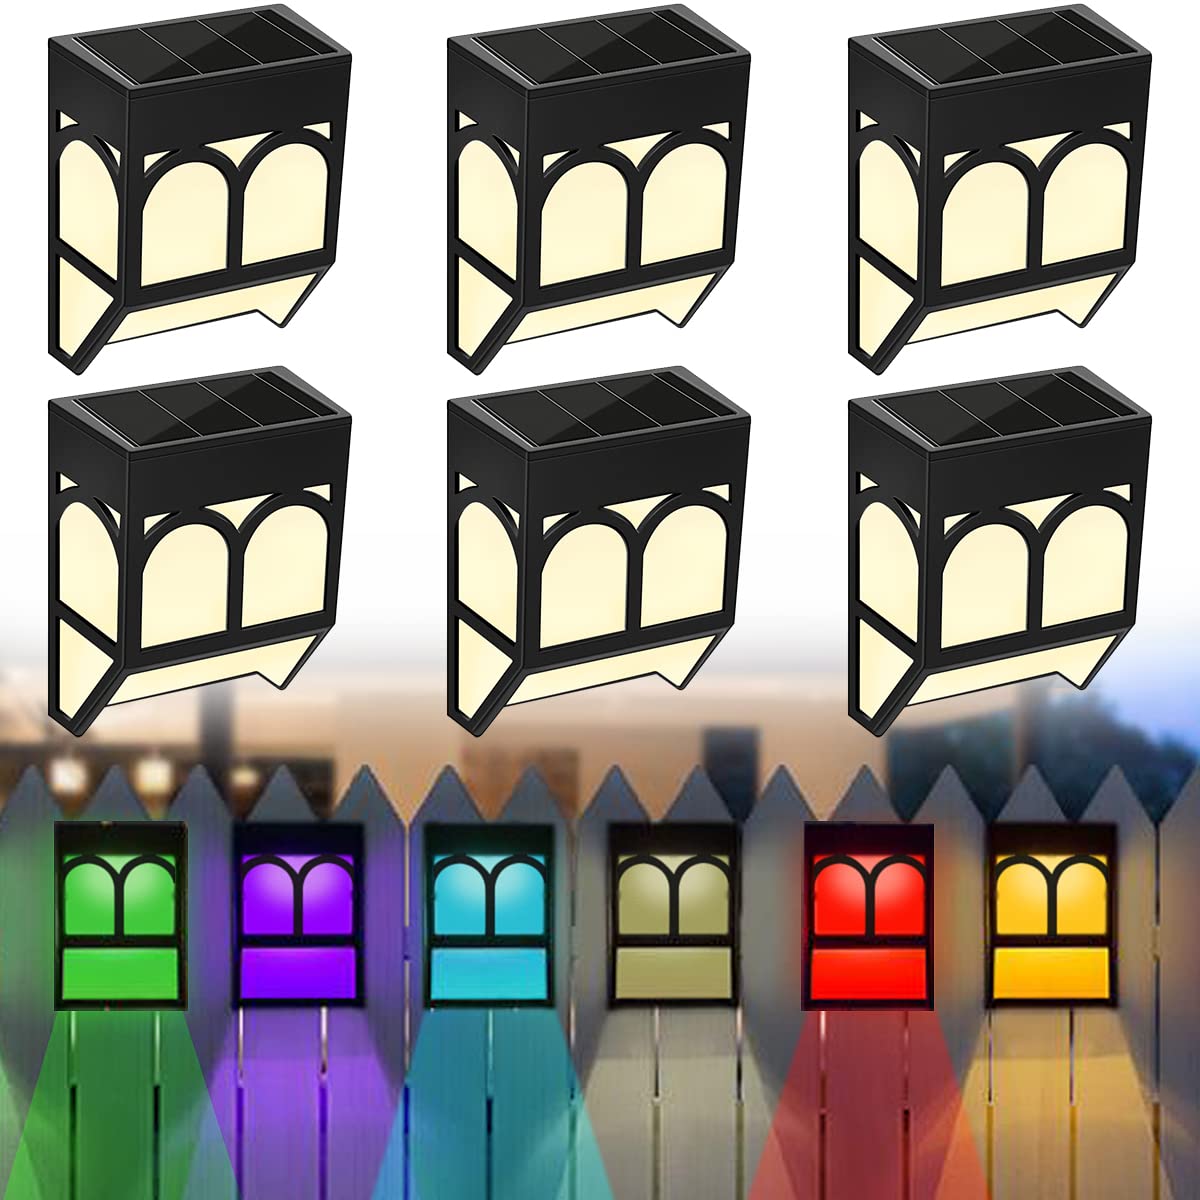 6 Pack Outdoor Wall Solar Lights,Fence Solar Lights Outdoor,Solar Wall Lights Outdoor Garden Waterproof, Decorative Garden Lights - Fence, Patio, Yard and Driveway Path,White Light/Color Changing